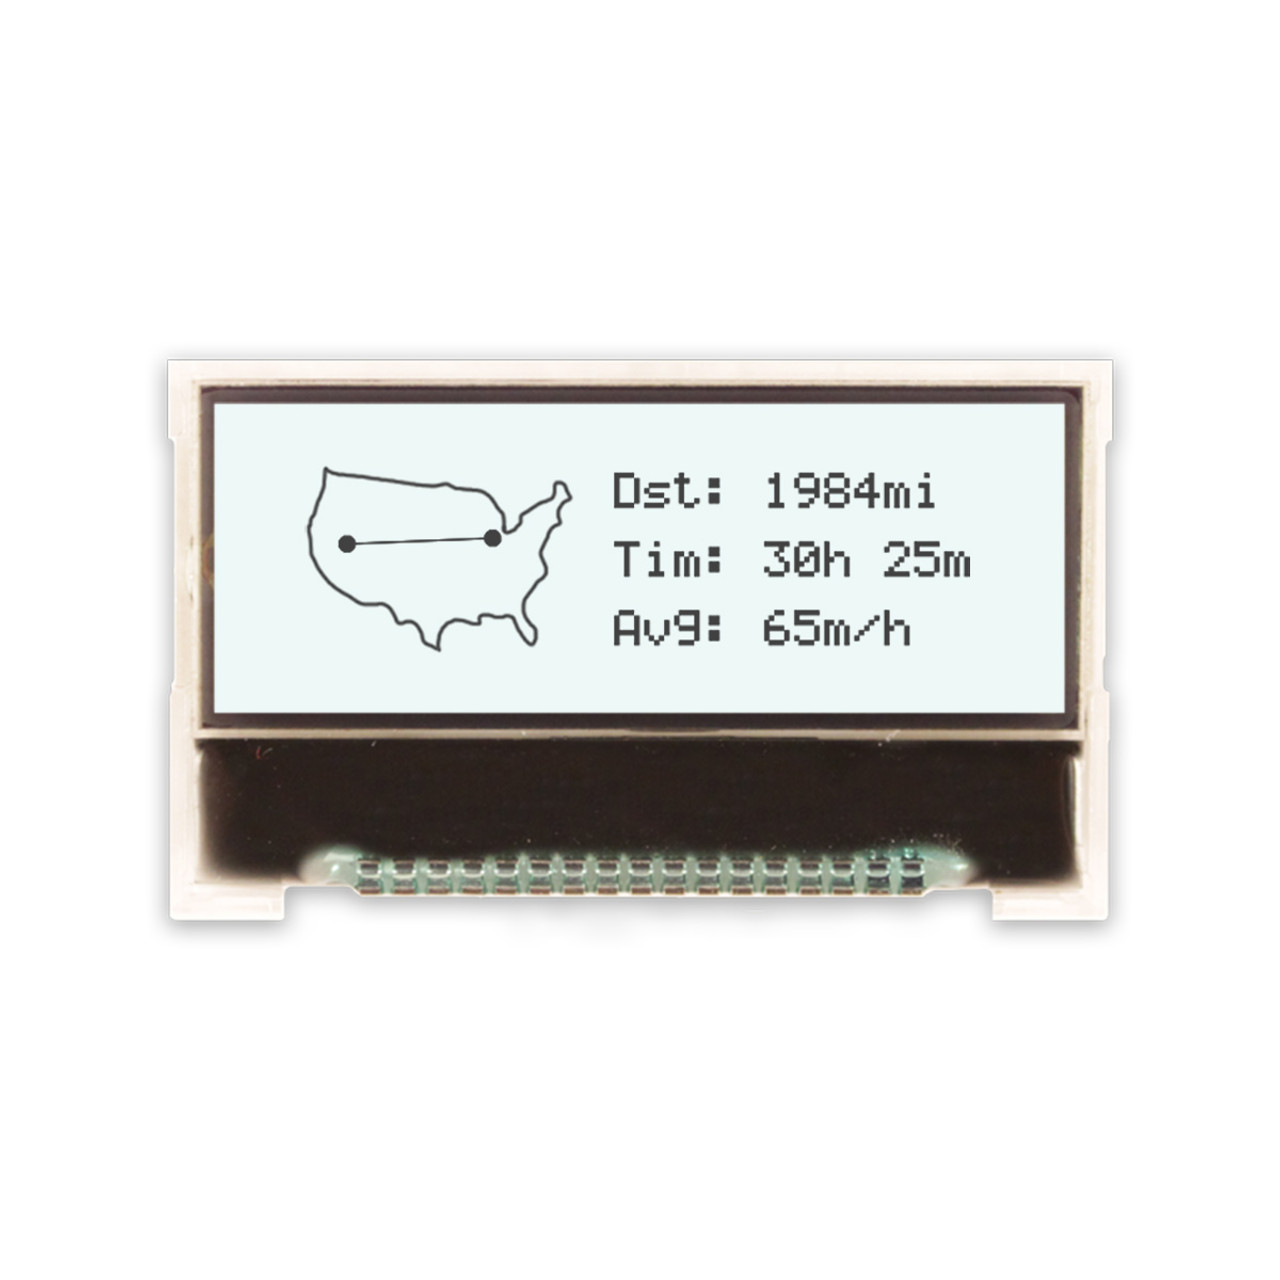 128X32 Graphic COG LCD | FSTN + Display with White Side Backlight